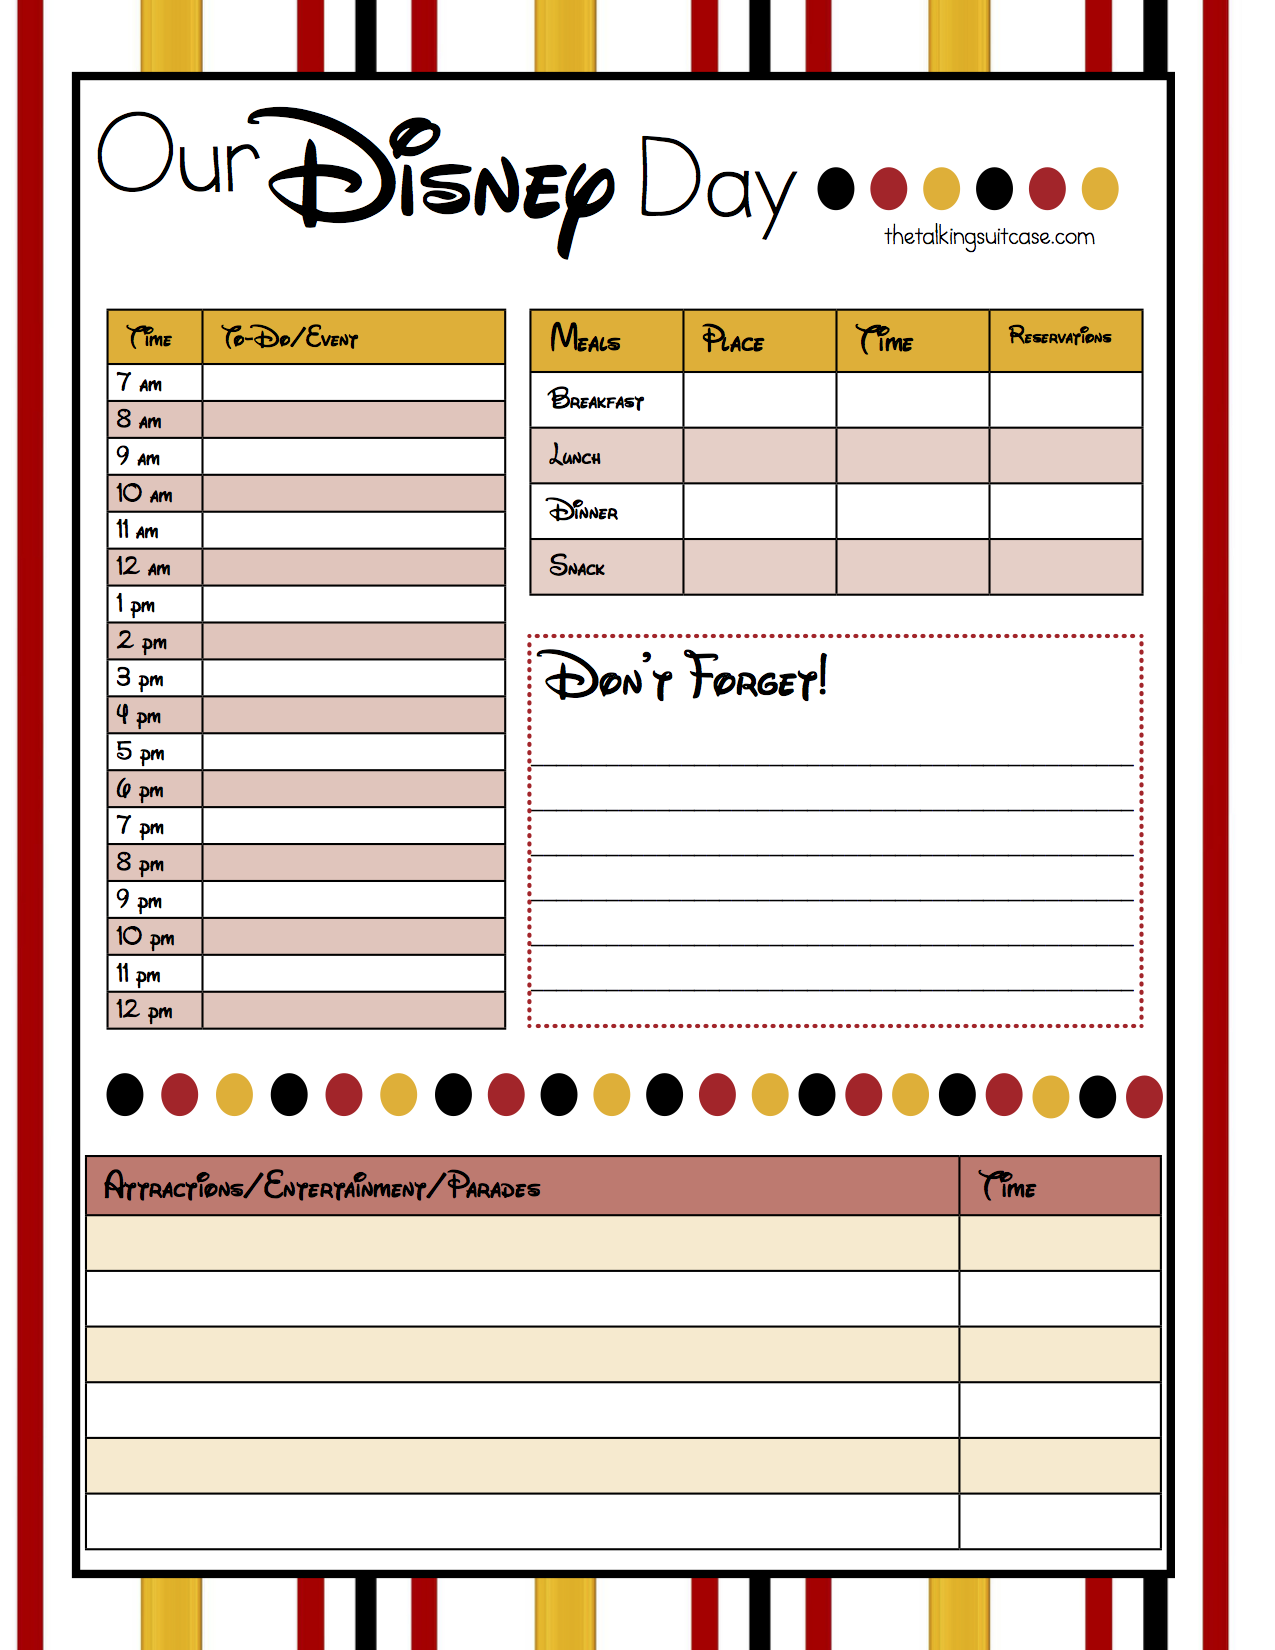 Plan your Disney Vacation using these FREE Planner Stickers